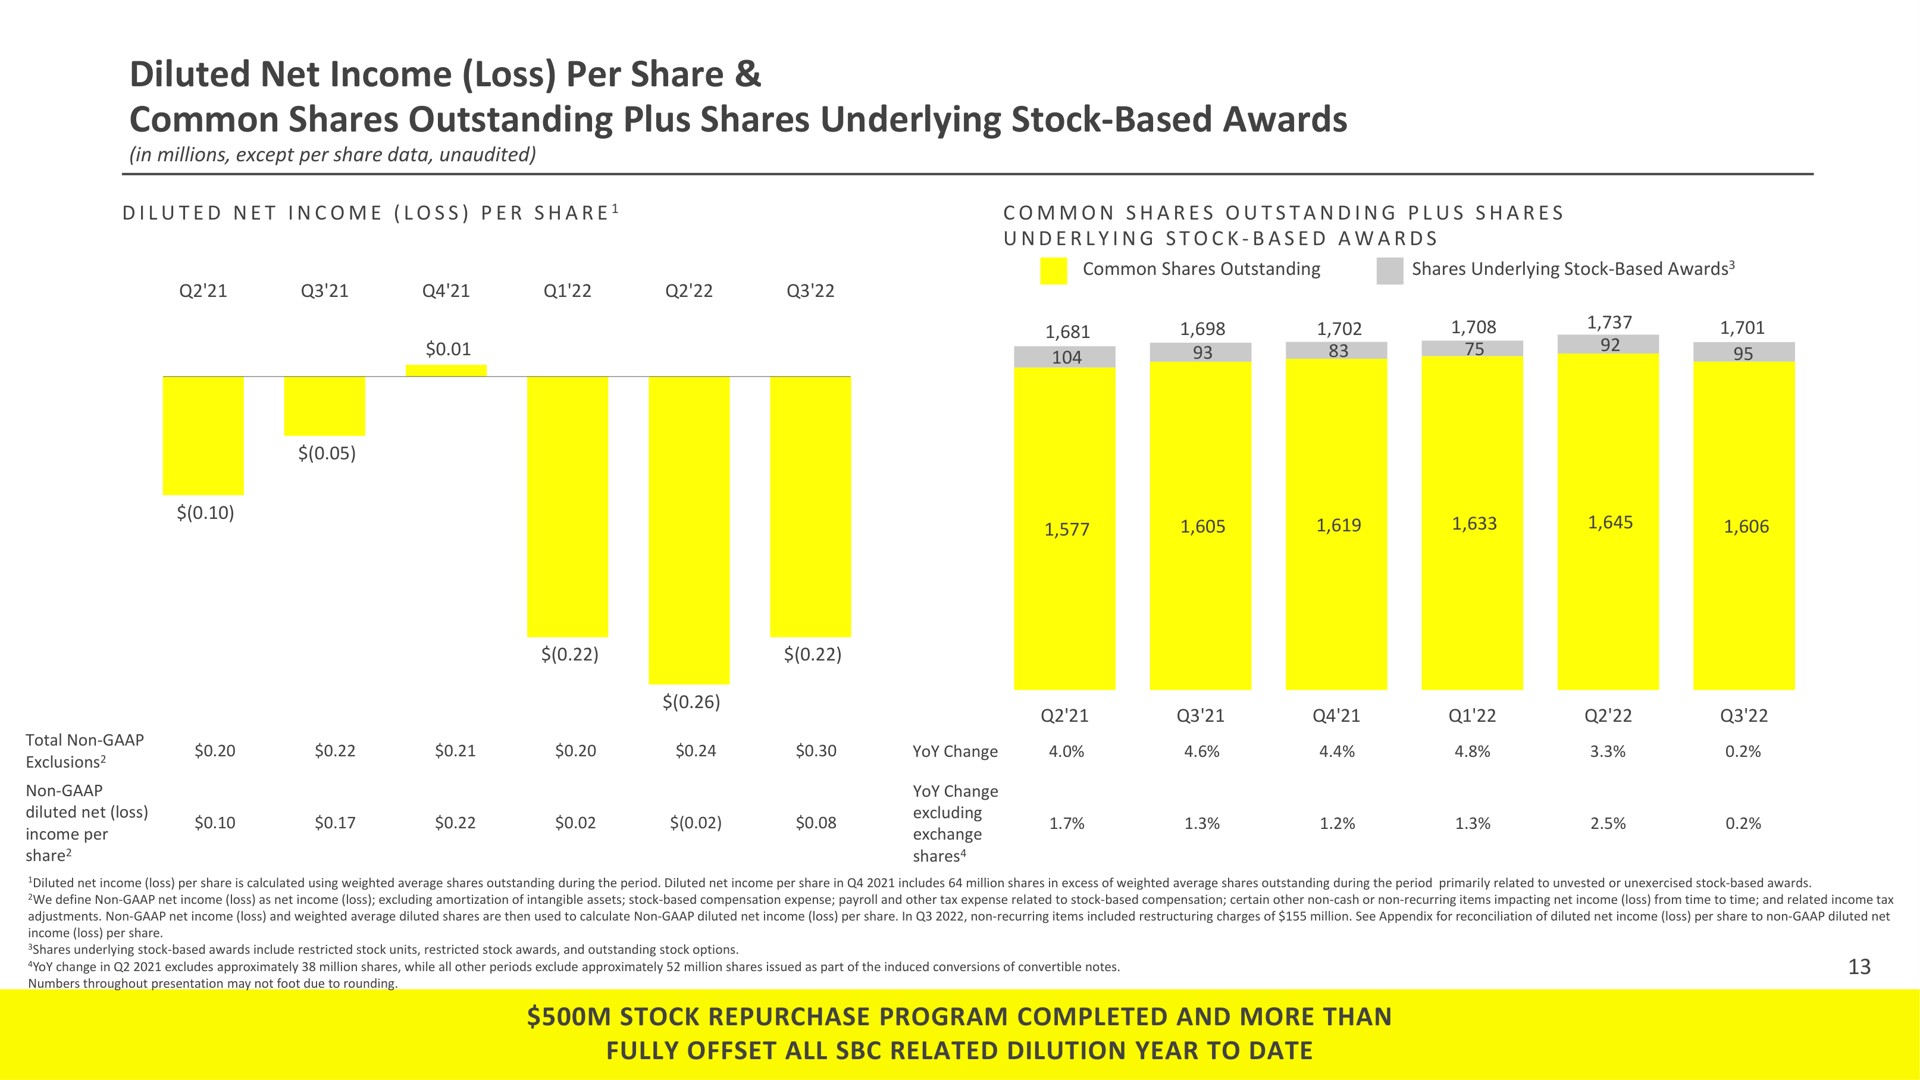 diluted net income loss per share common shares outstanding plus shares underlying stock based awards stock repurchase program completed and more than fully offset all related dilution year to date | Snap Inc